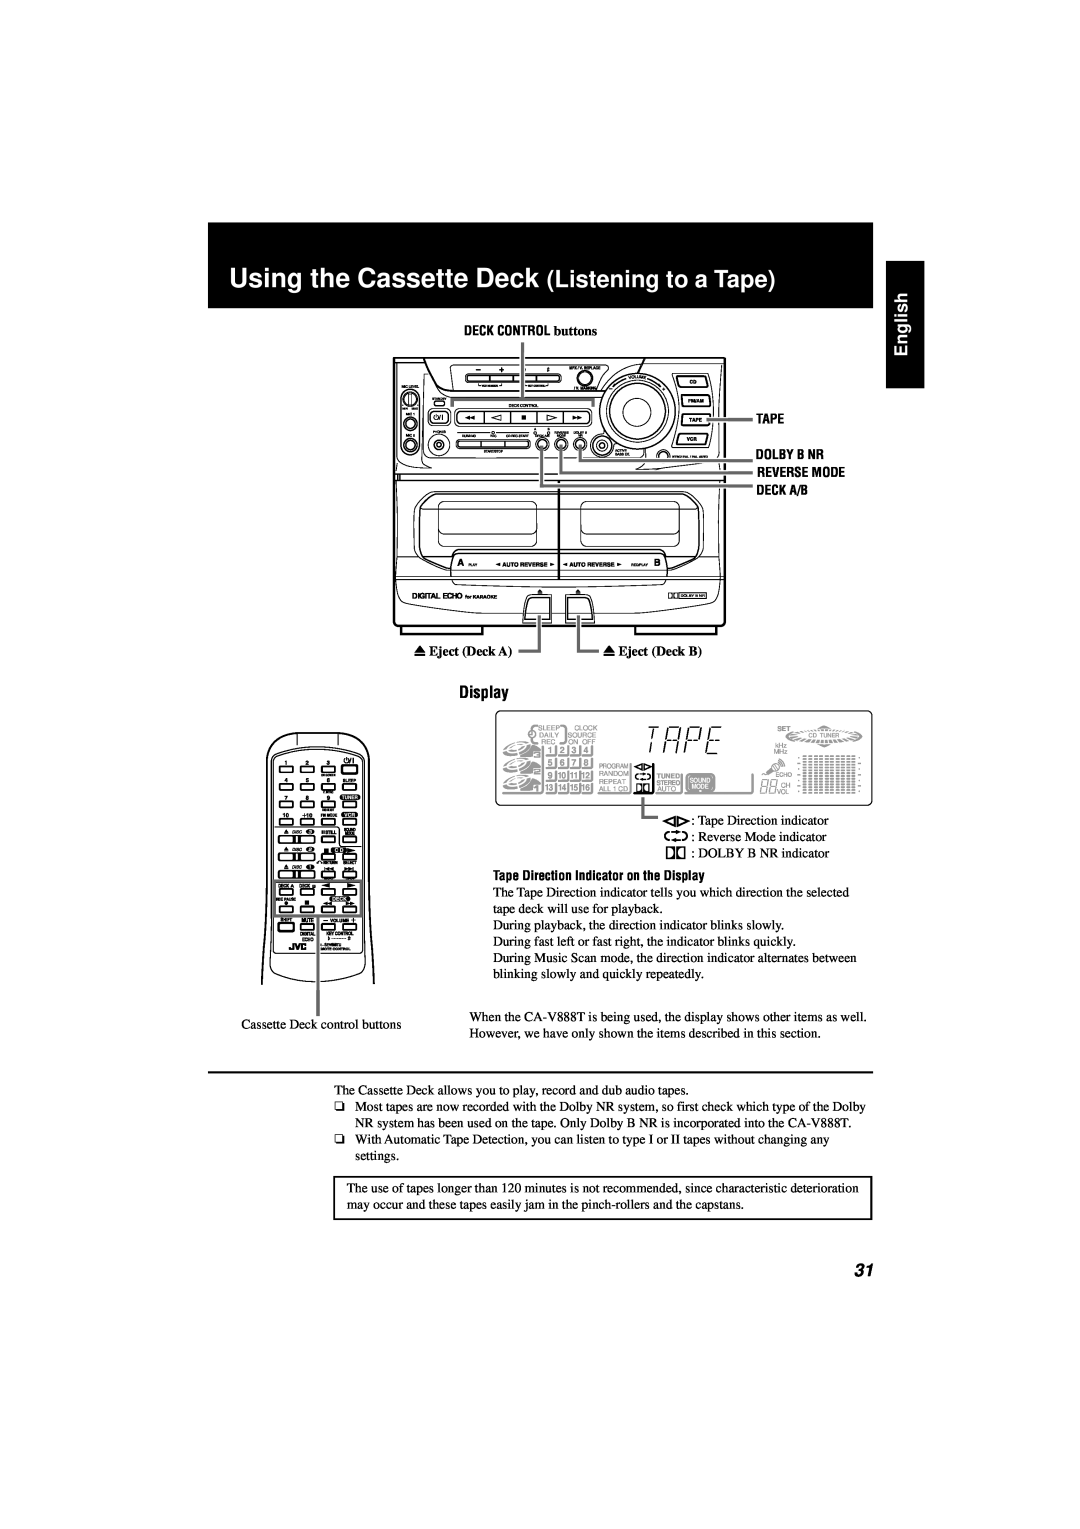 JVC CA-V888T manual Using the Cassette Deck Listening to a Tape, English, Display, Deck A/B 